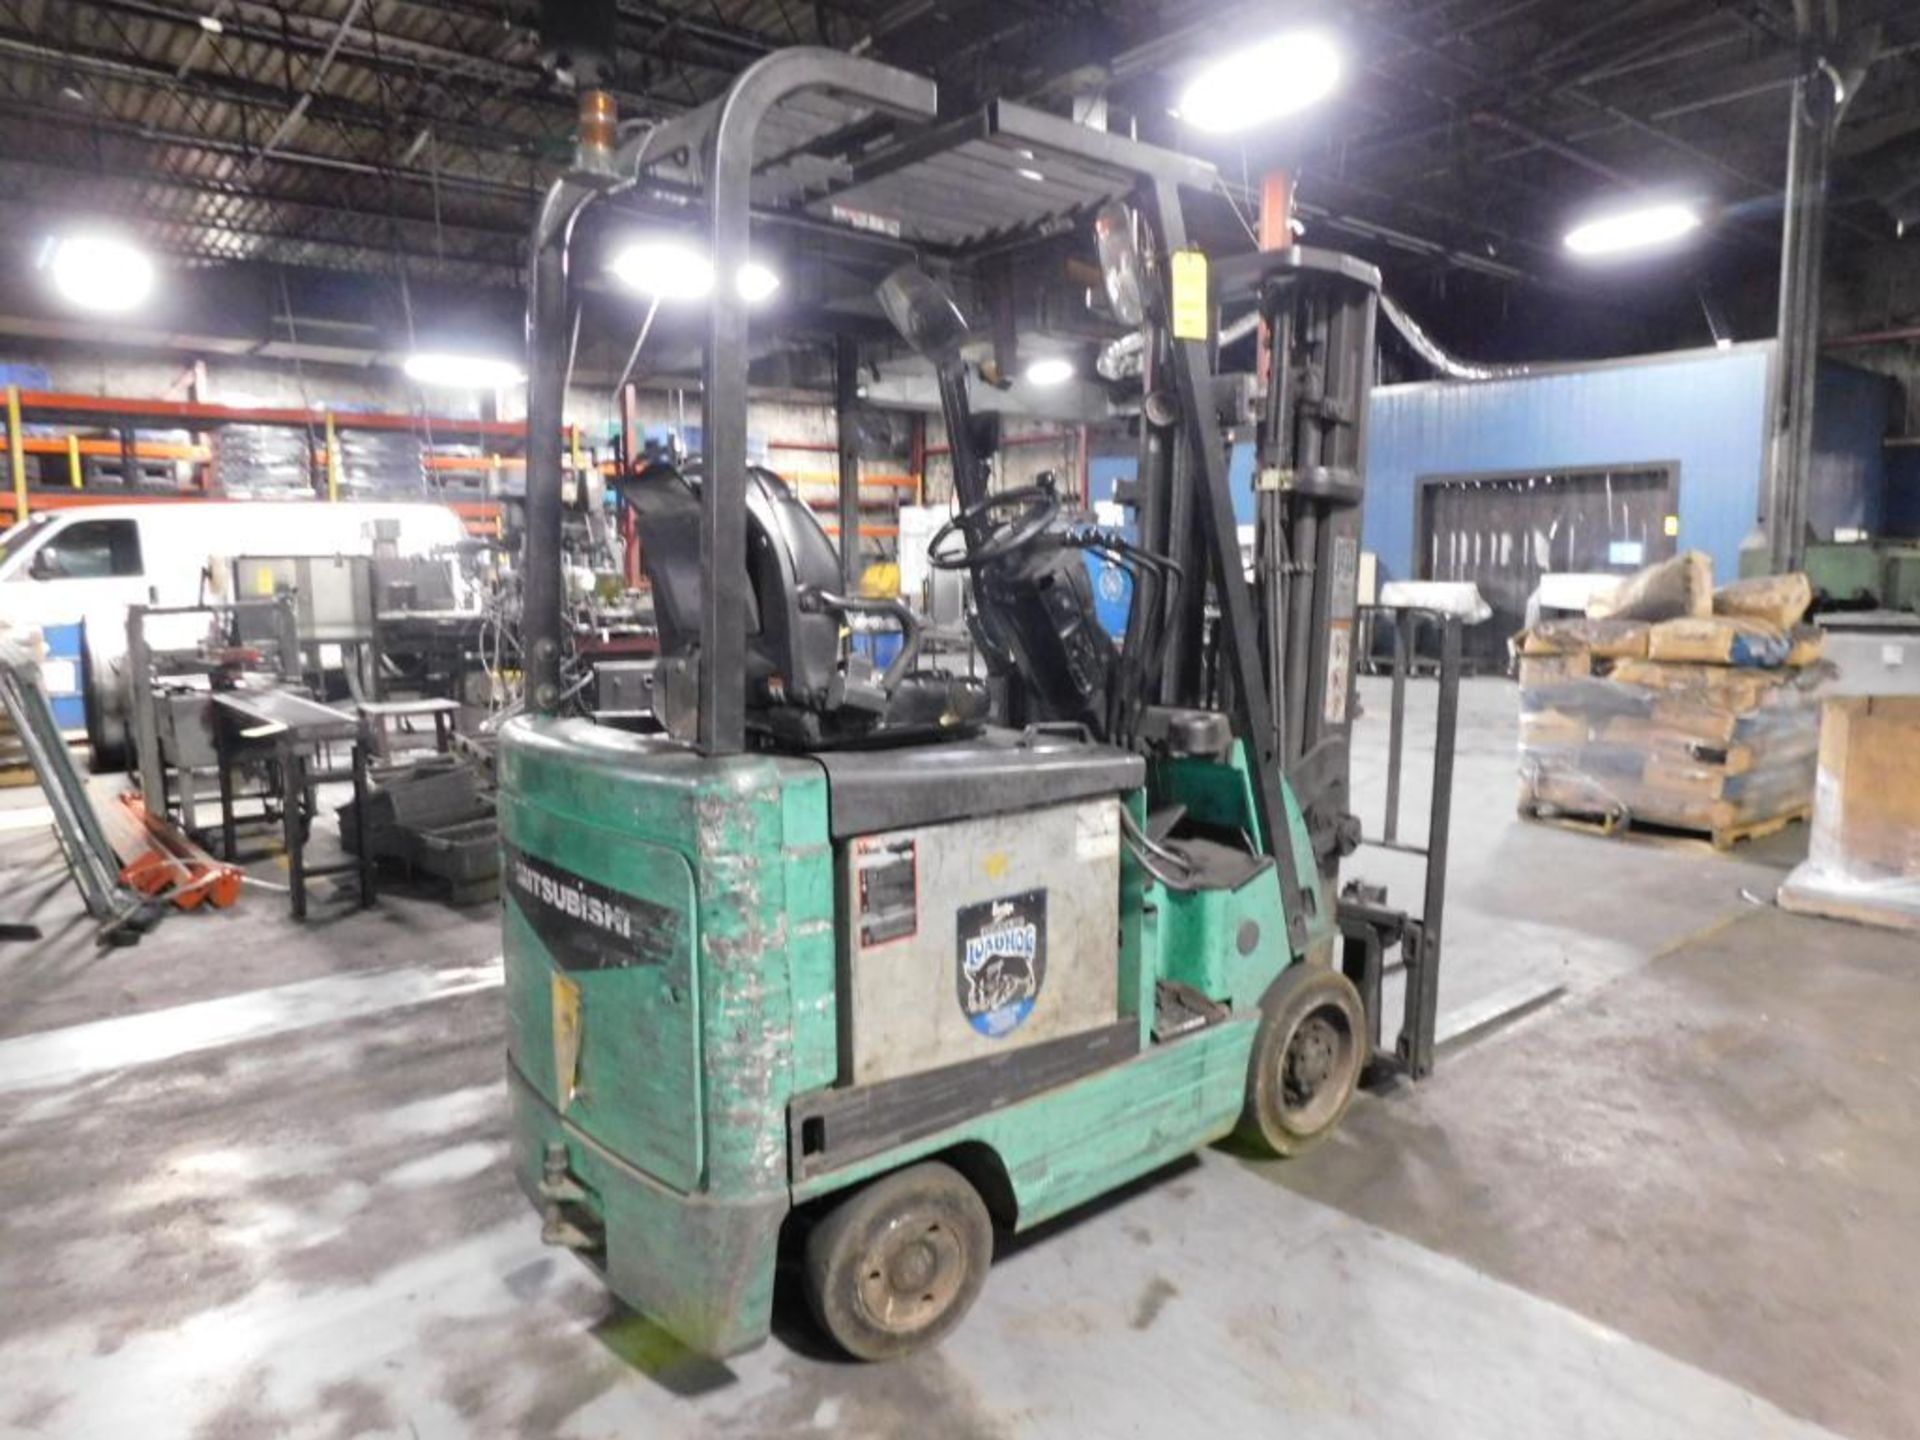 Mitsubishi Electric Forklift Model FBC15N-ACC, 3-Stage Mast, Side Shift, w/Charger, S/N ADC14020Z, 3 - Image 2 of 13